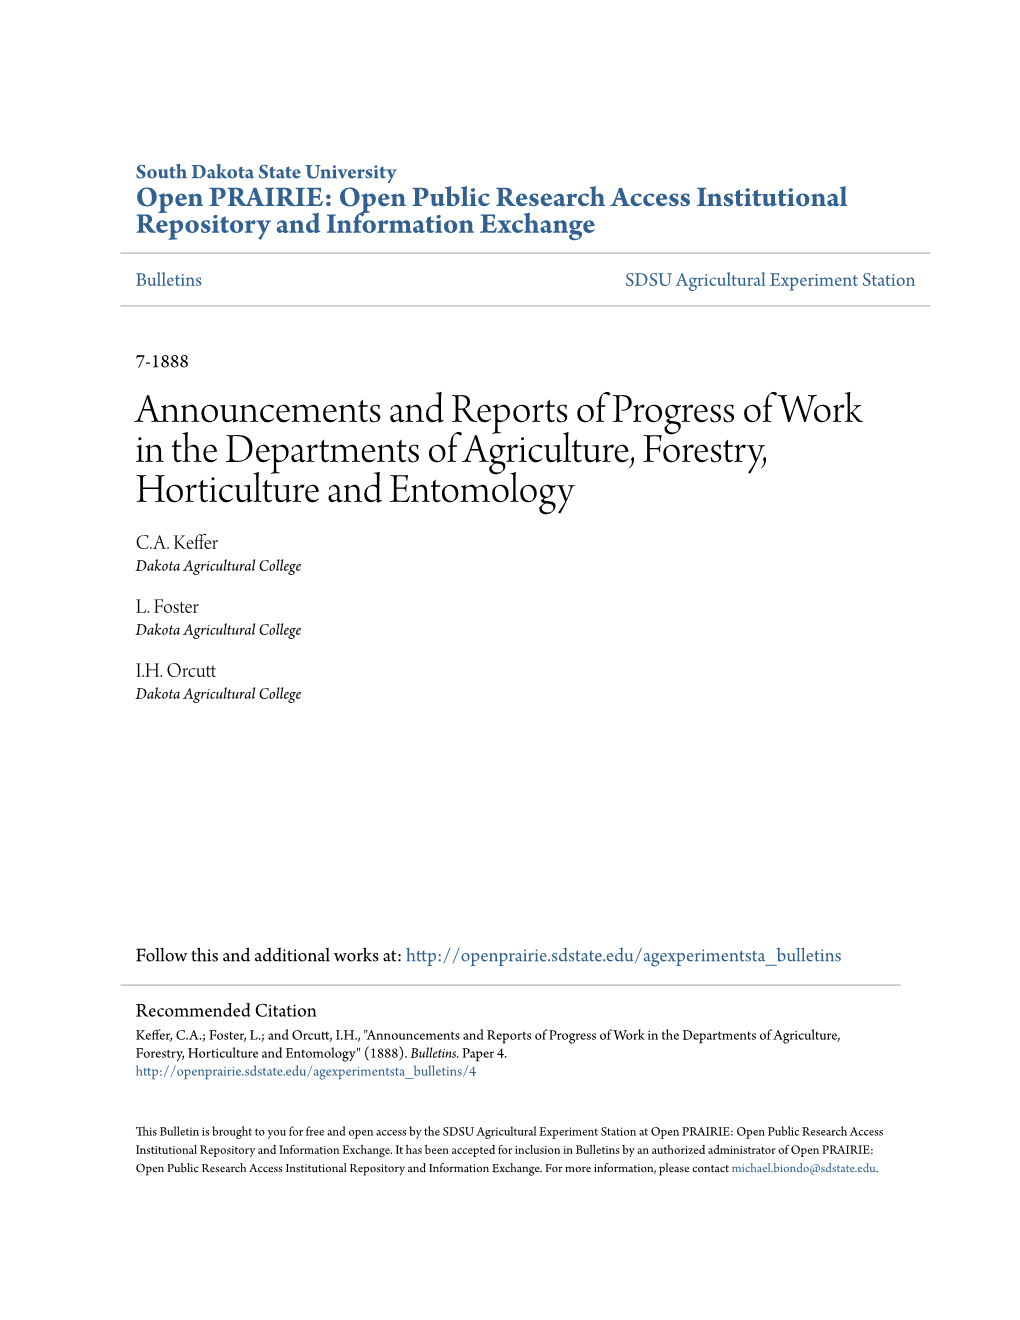 Announcements and Reports of Progress of Work in the Departments of Agriculture, Forestry, Horticulture and Entomology C.A